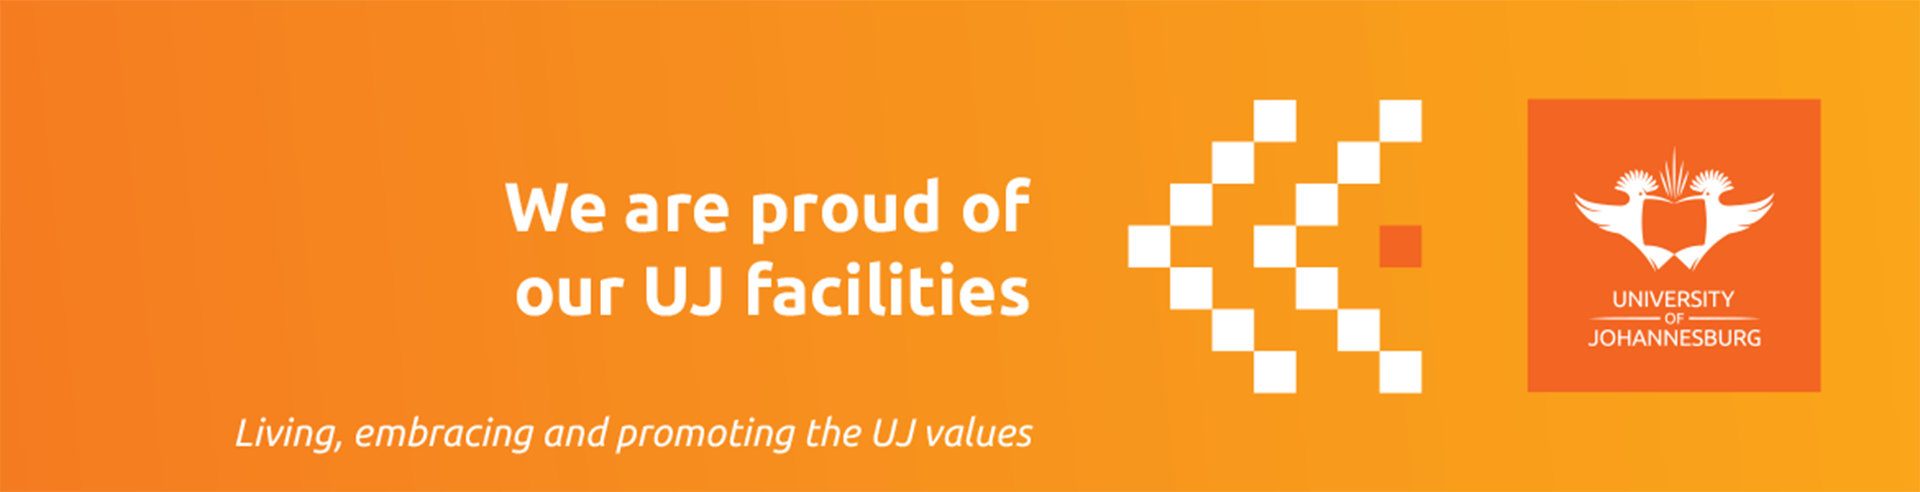 Uj Values Expressions Posters 2020 Ulink 1170x300mm 7